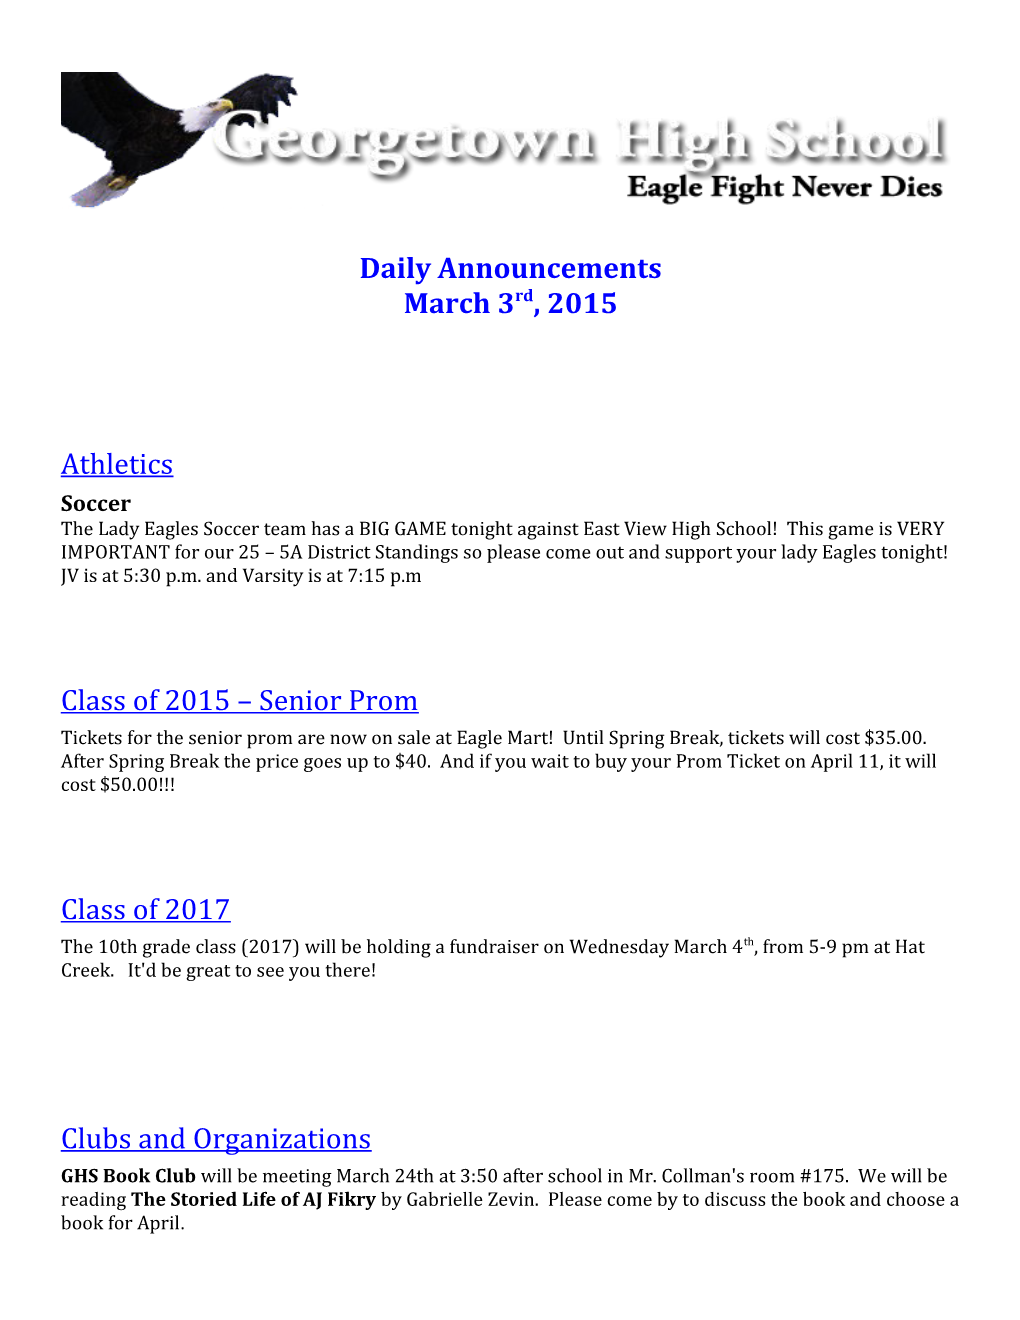 Daily Announcements s1